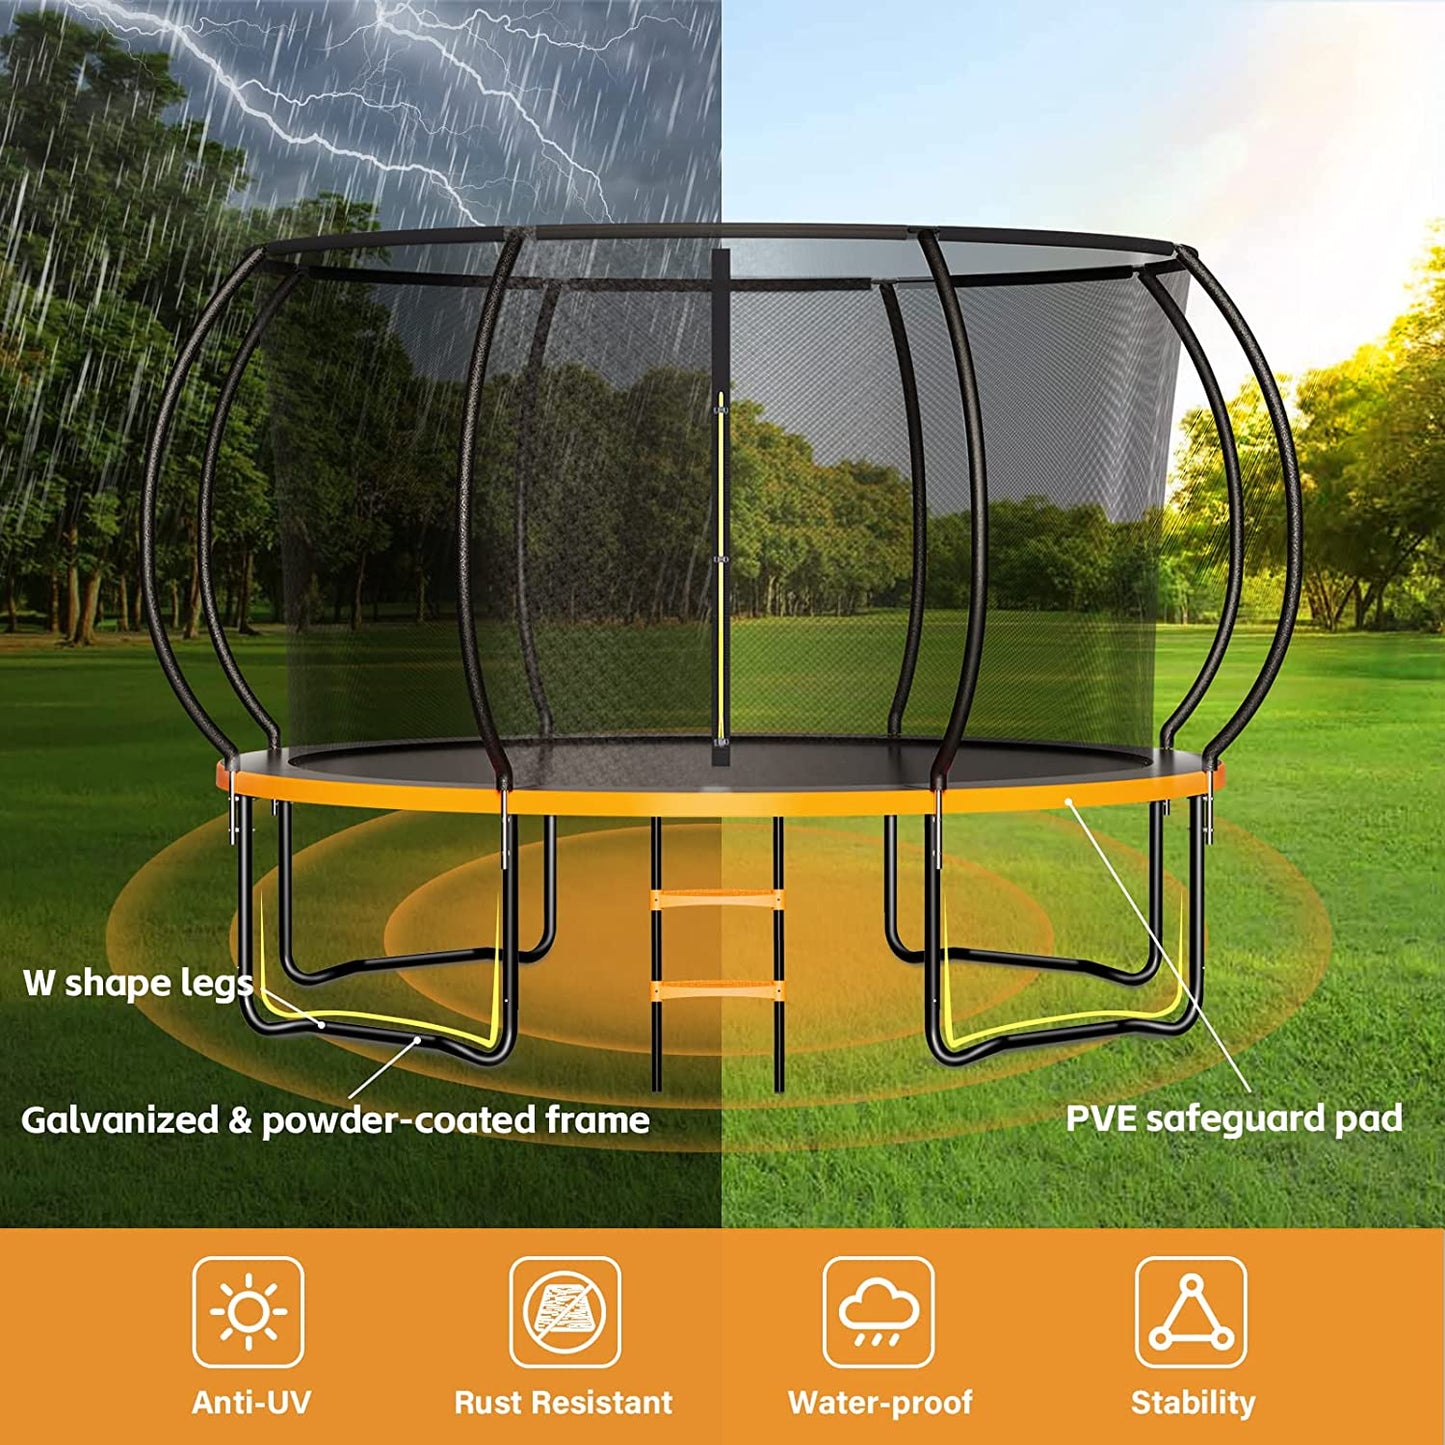 Zevemomo Outdoor Trampoline for Kids and Adults, 12FT 14FT 15FT 16FT Trampoline with Curved Poles Reinforced Enclosure, Recreational Trampolines with Ladder & Enclosure Net